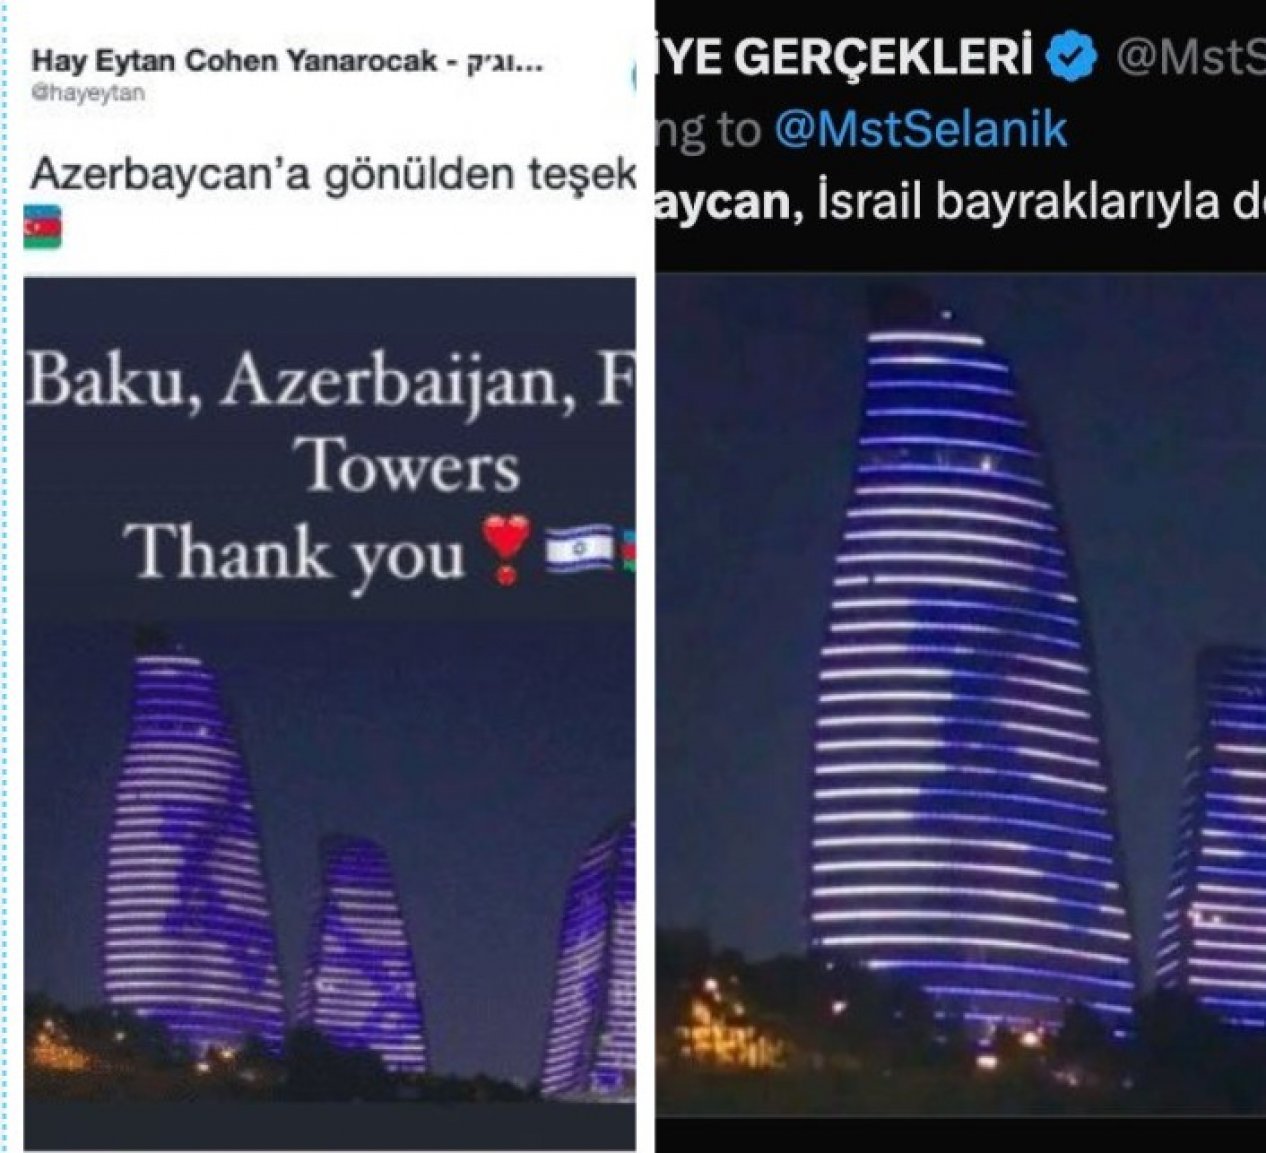 Why was “Flame Towers” illuminated in Israeli flag colors?